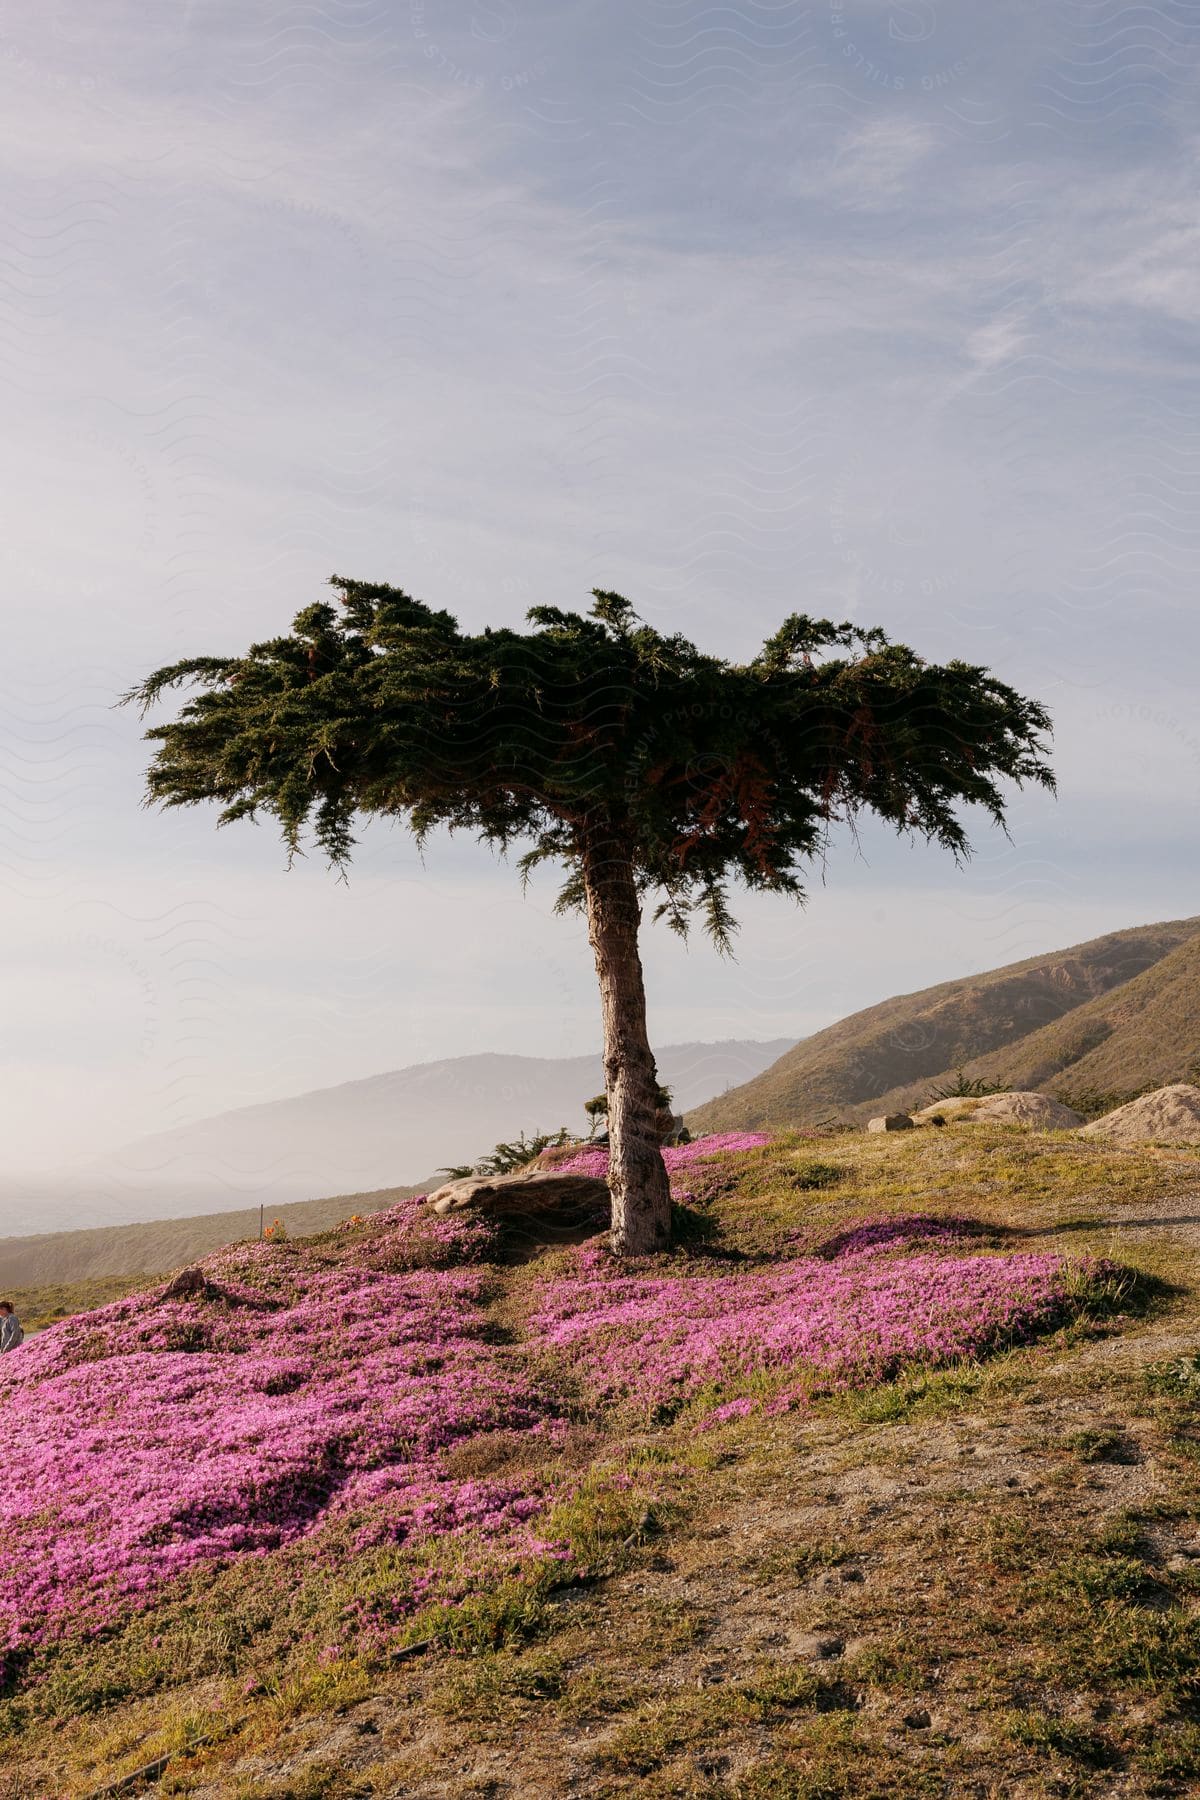 Pink flowers cover a hillside beneath a tree with mountains in the distance under a hazy sky